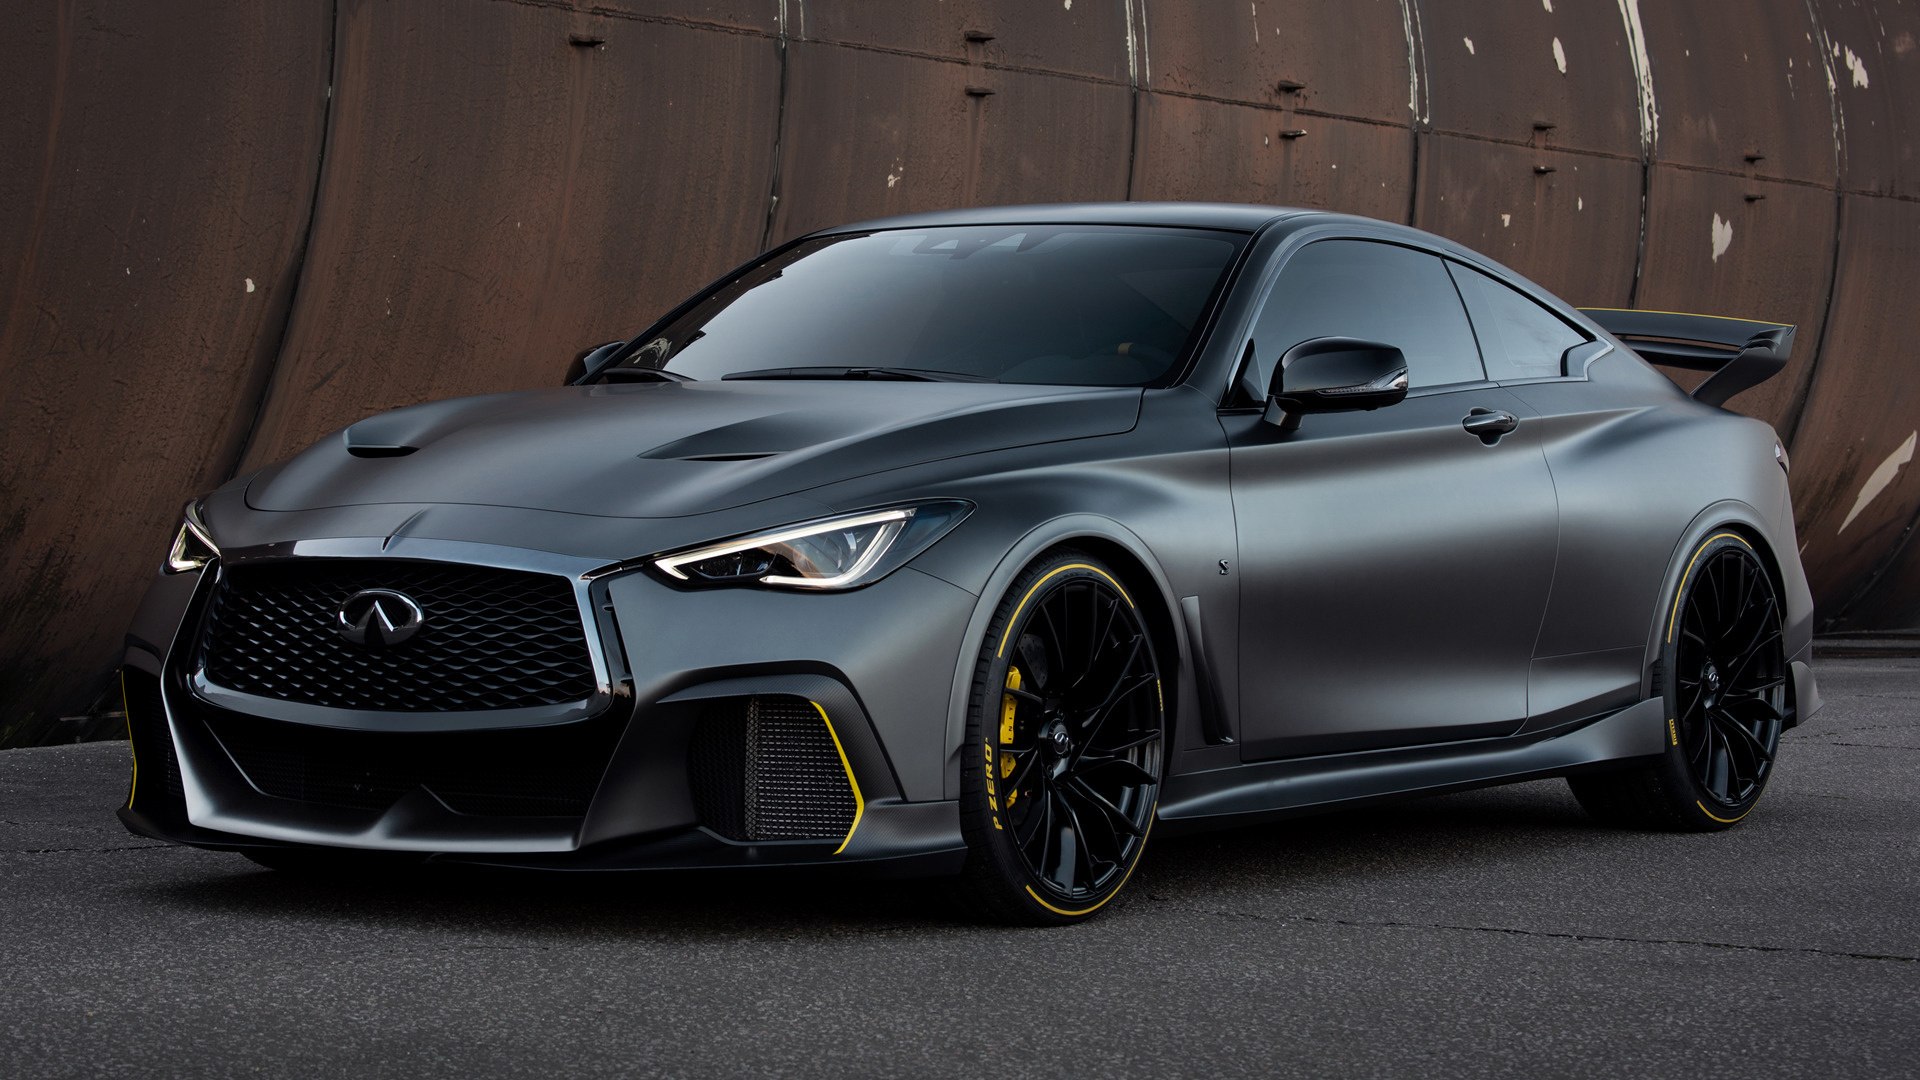 2018 Infiniti Project Black S Prototype - Wallpapers and HD Images